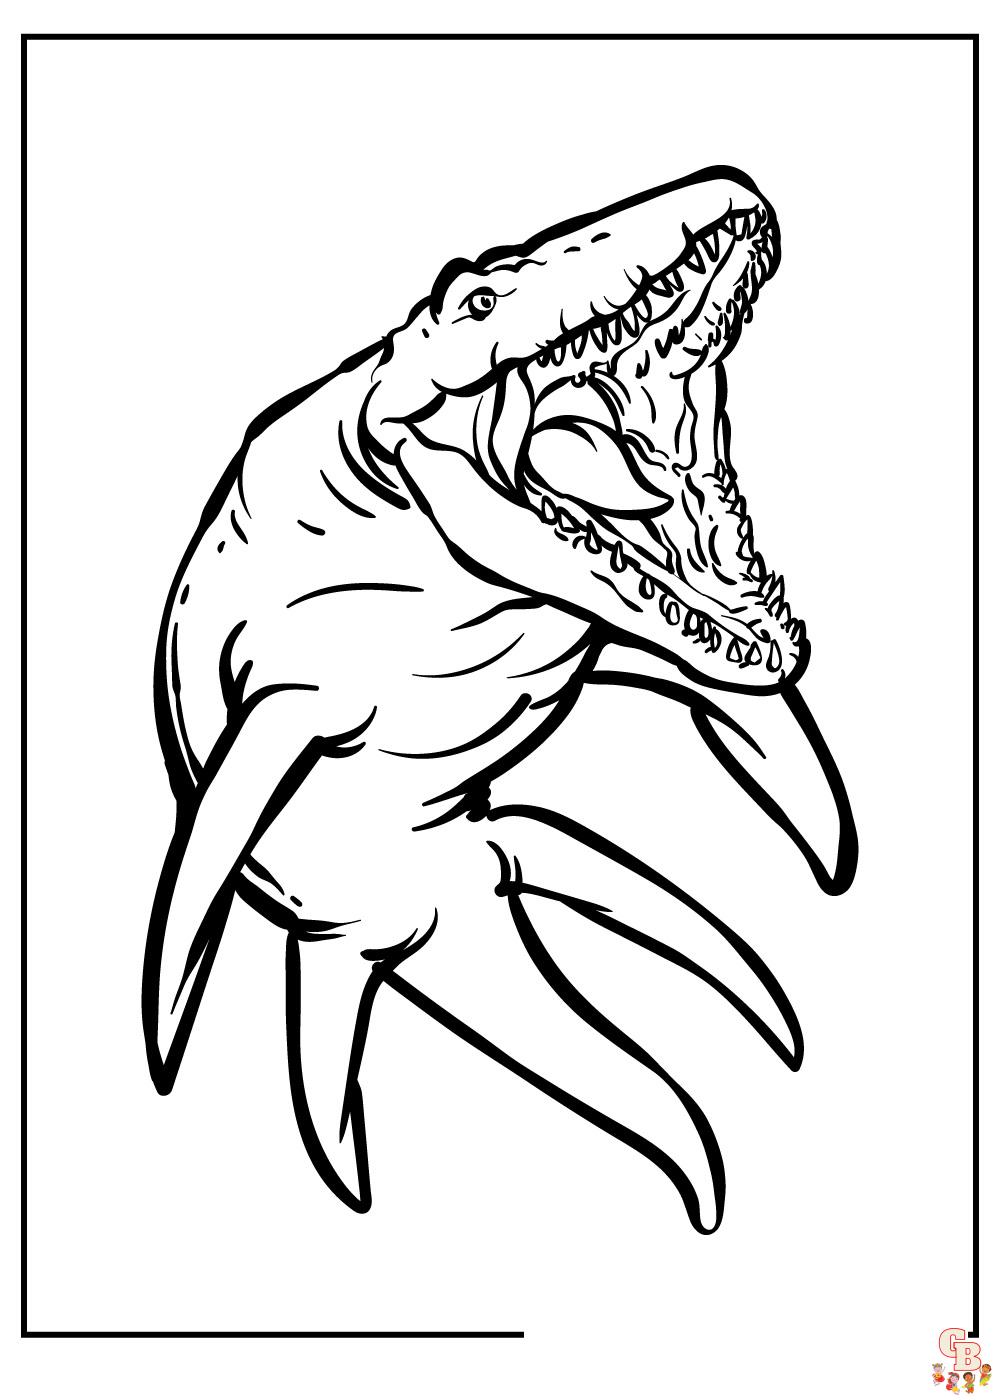 Get creative with mosasaurus coloring pages free and easy